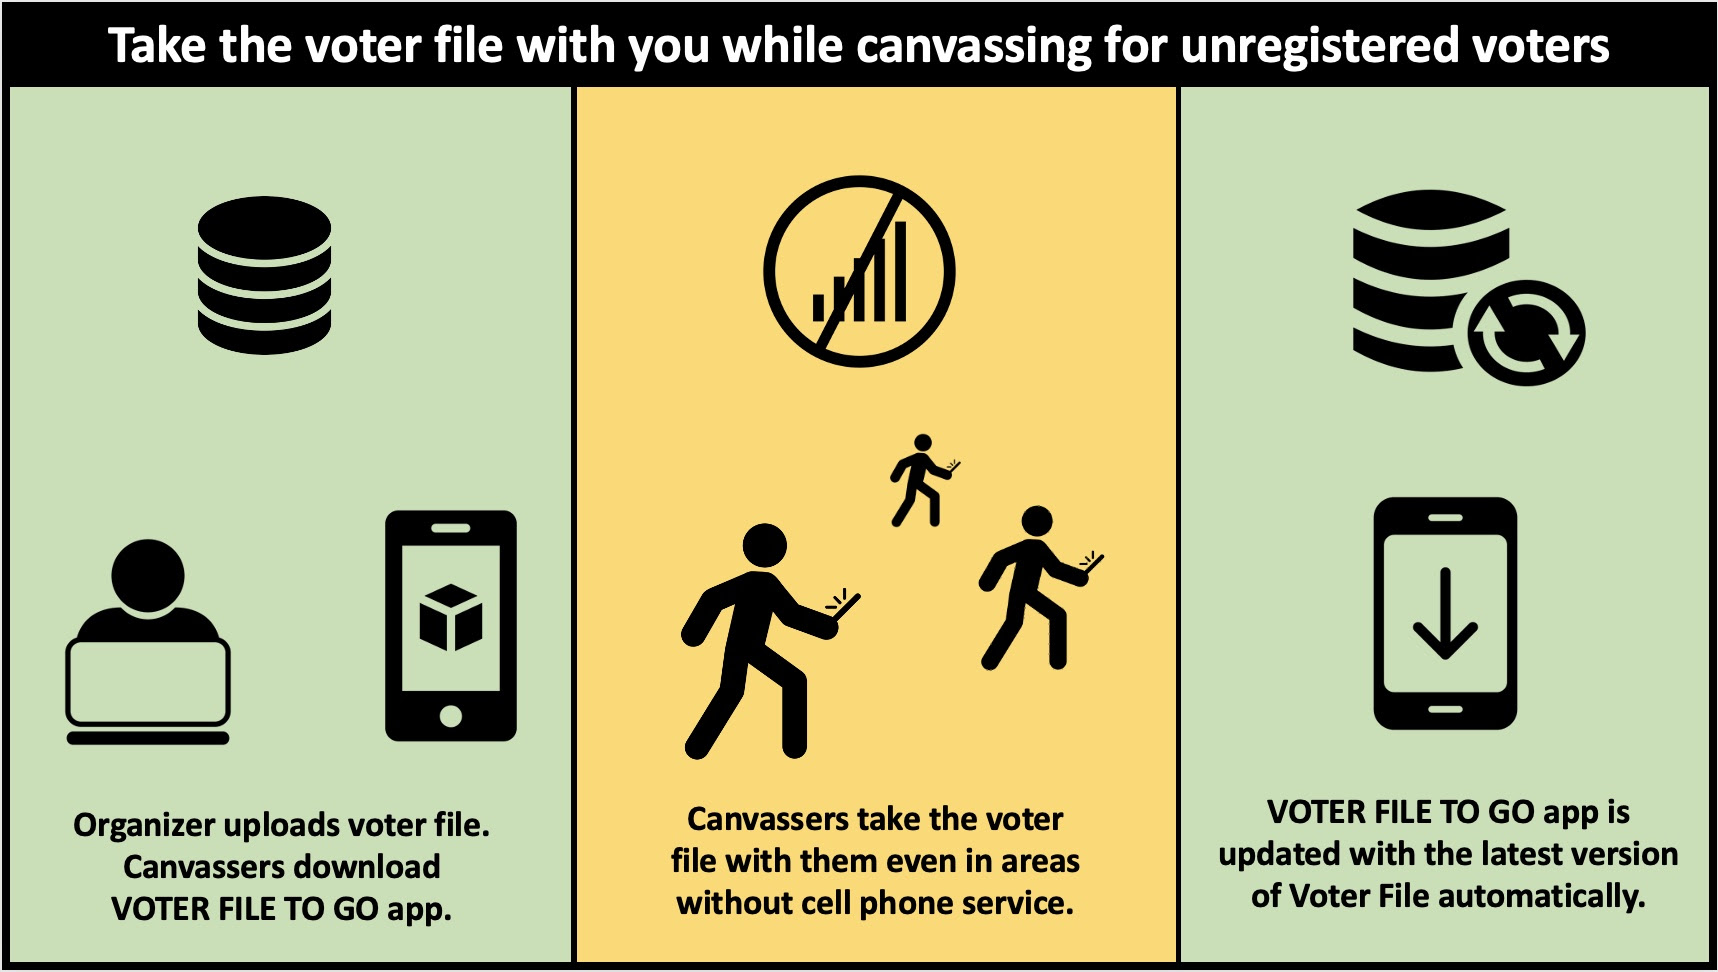 Take the voter file with you when canvassing in areas without cellular coverage.